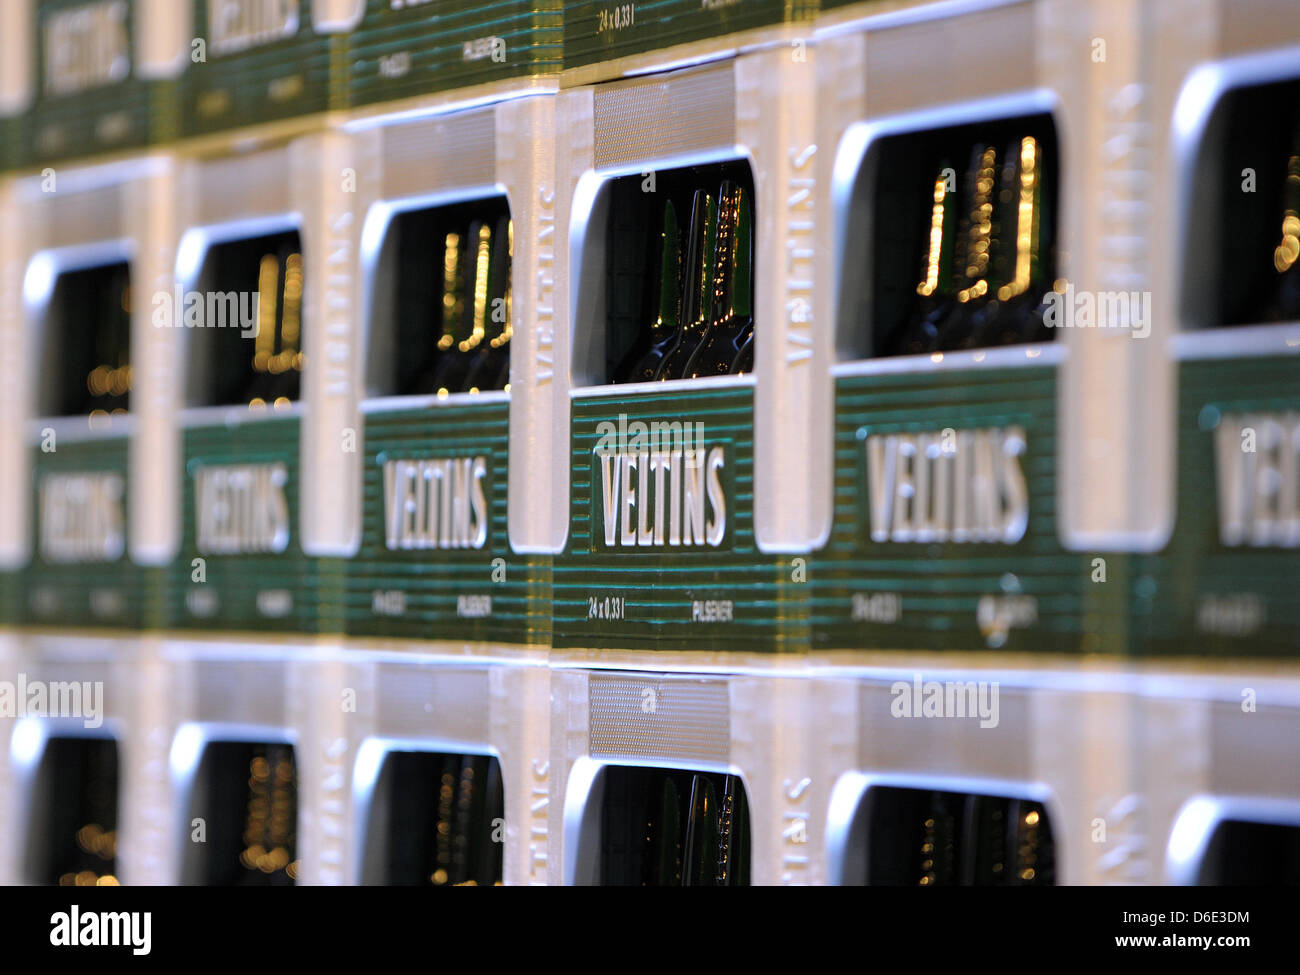 Veltins beer crates are piled in Duesseldorf, Germany, 17 January 2012. The private brewery Veltins presented its figures of the last financial year. Photo: FEDERICO GAMBARINI Stock Photo